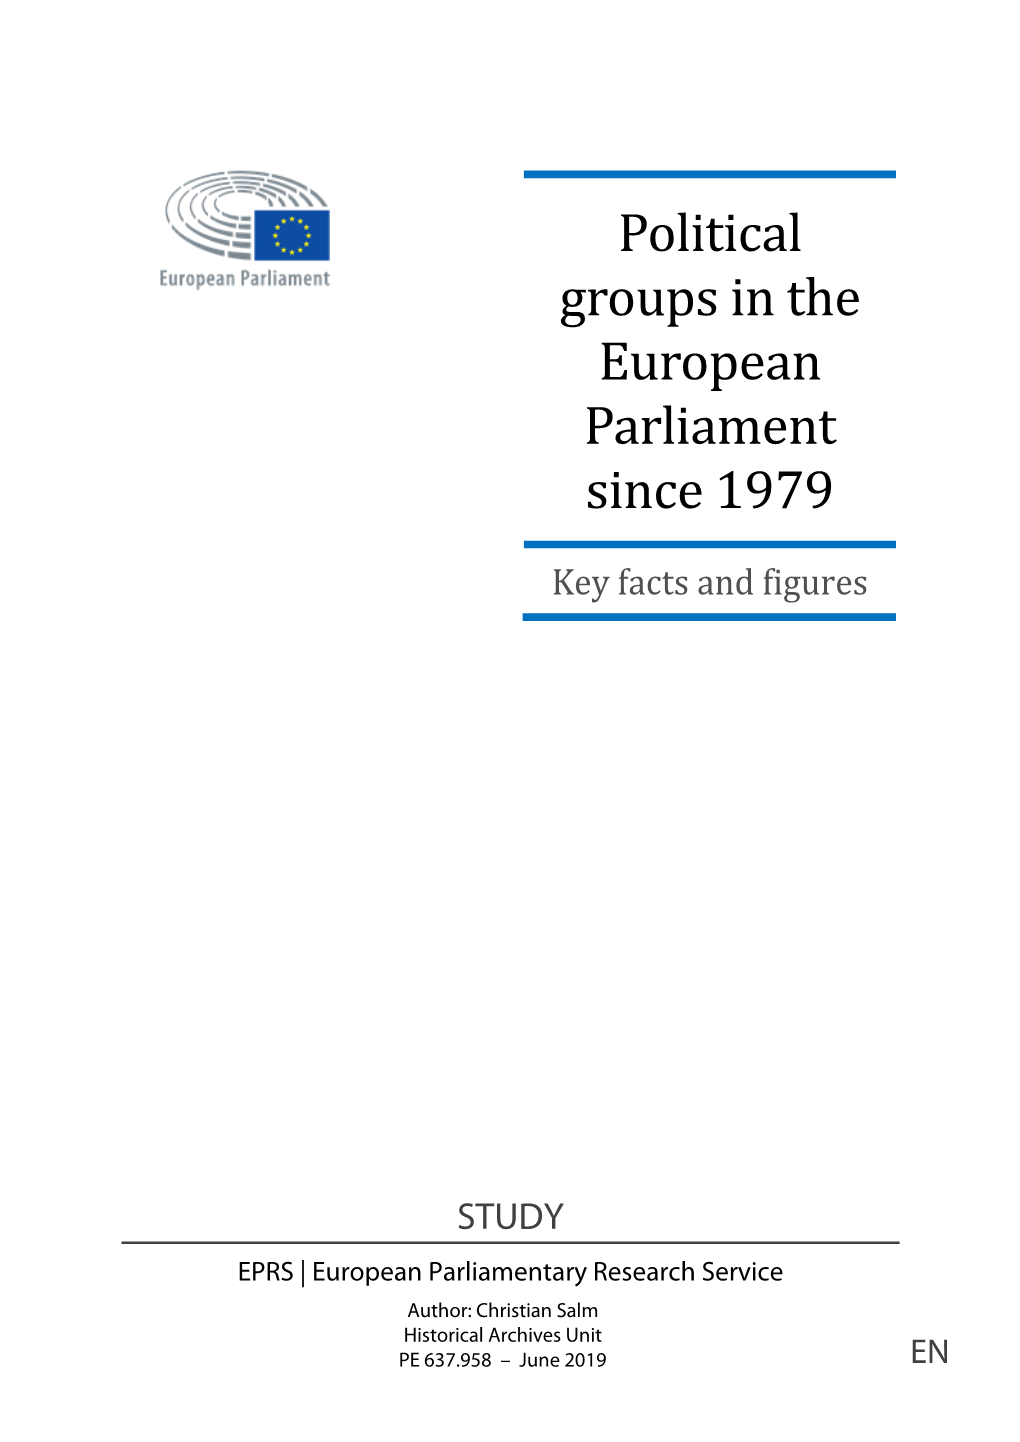 Political Groups in the European Parliament Since 1979: Key Facts and Figures